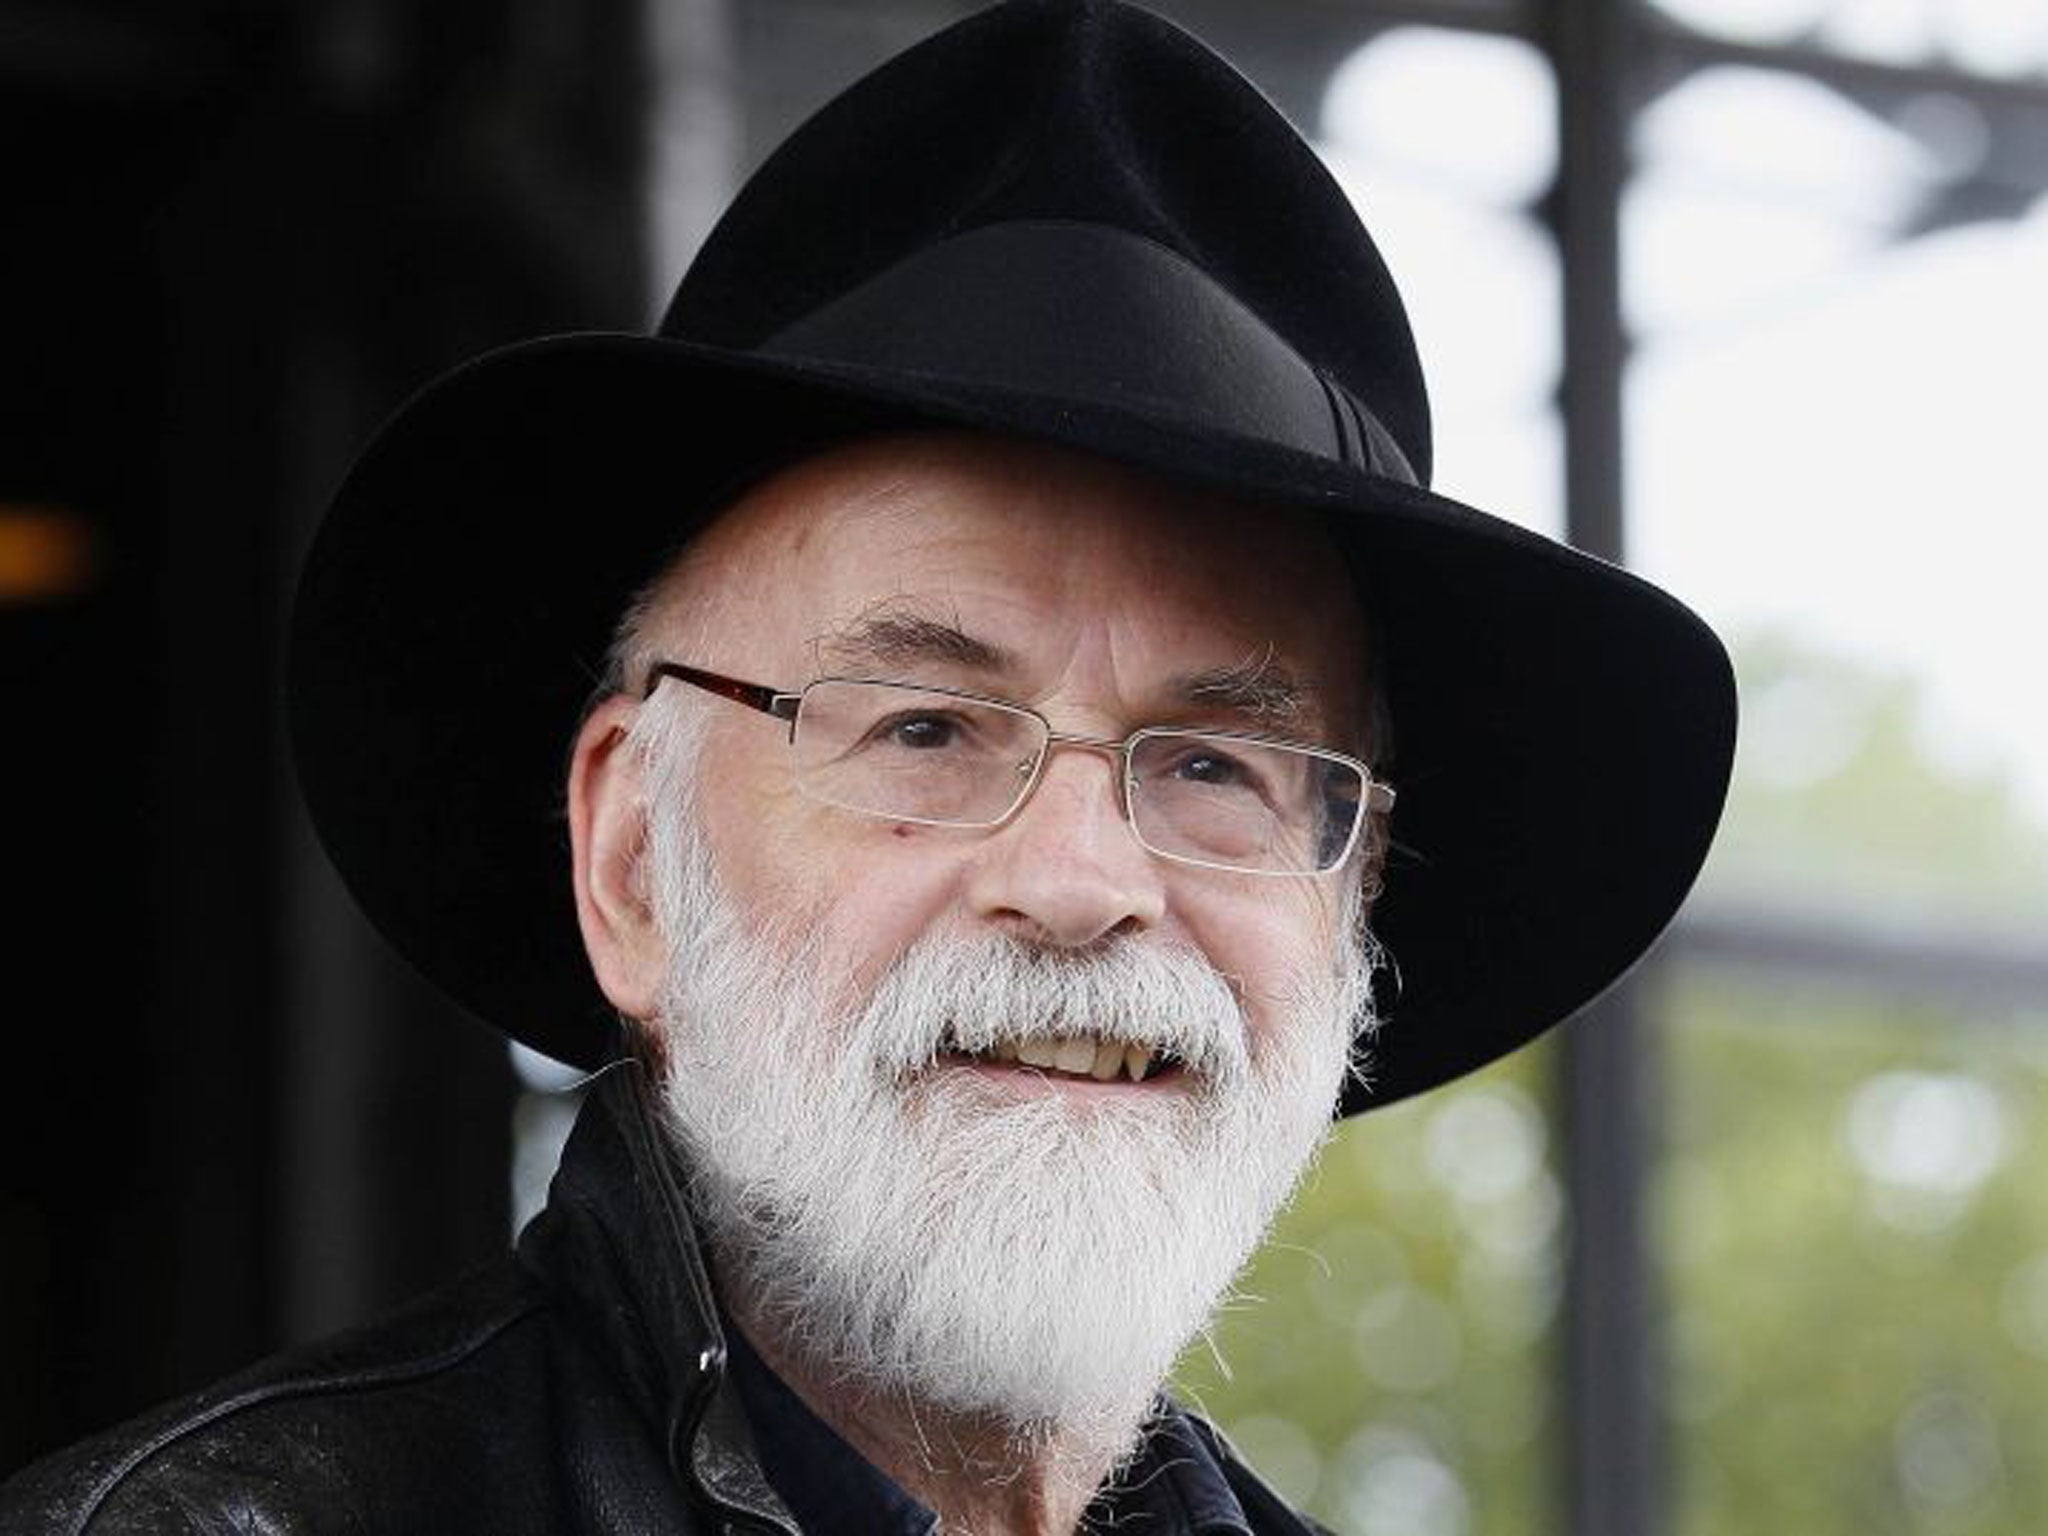 Pratchett: he called for bankers’ multi-million-pound bonuses to be used to fight dementia